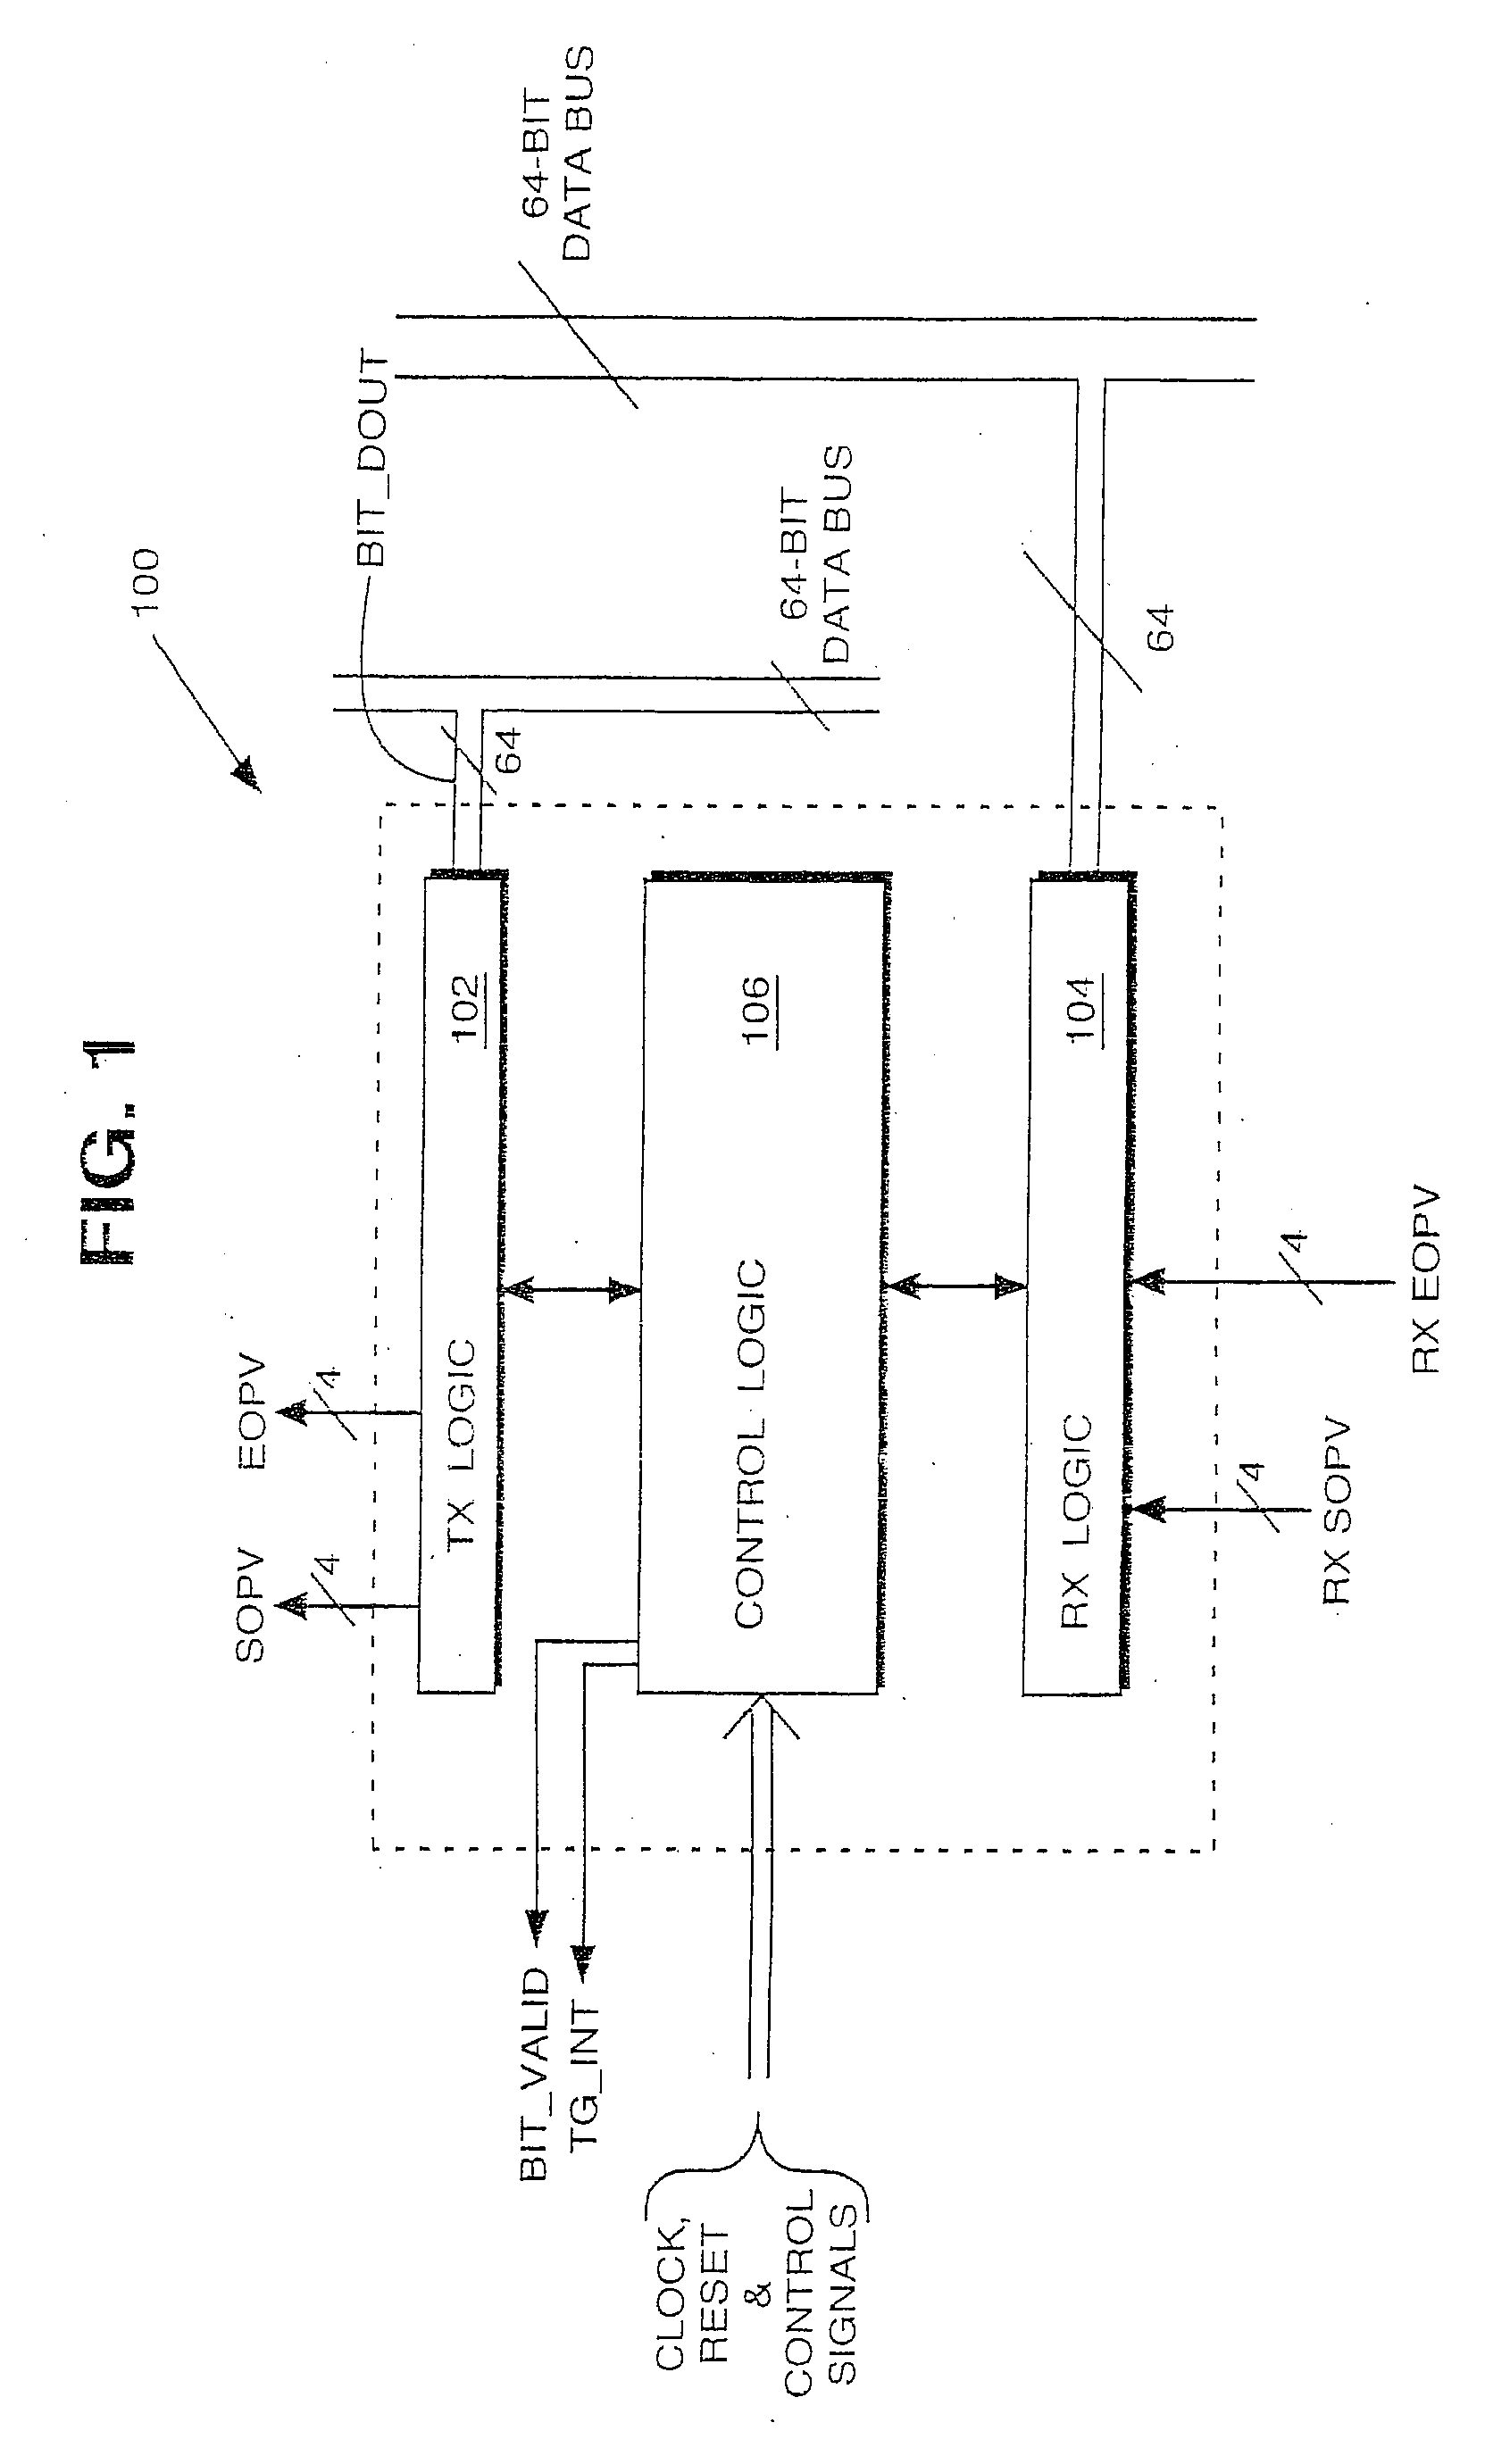 Method and apparatus for programmable generation of traffic streams